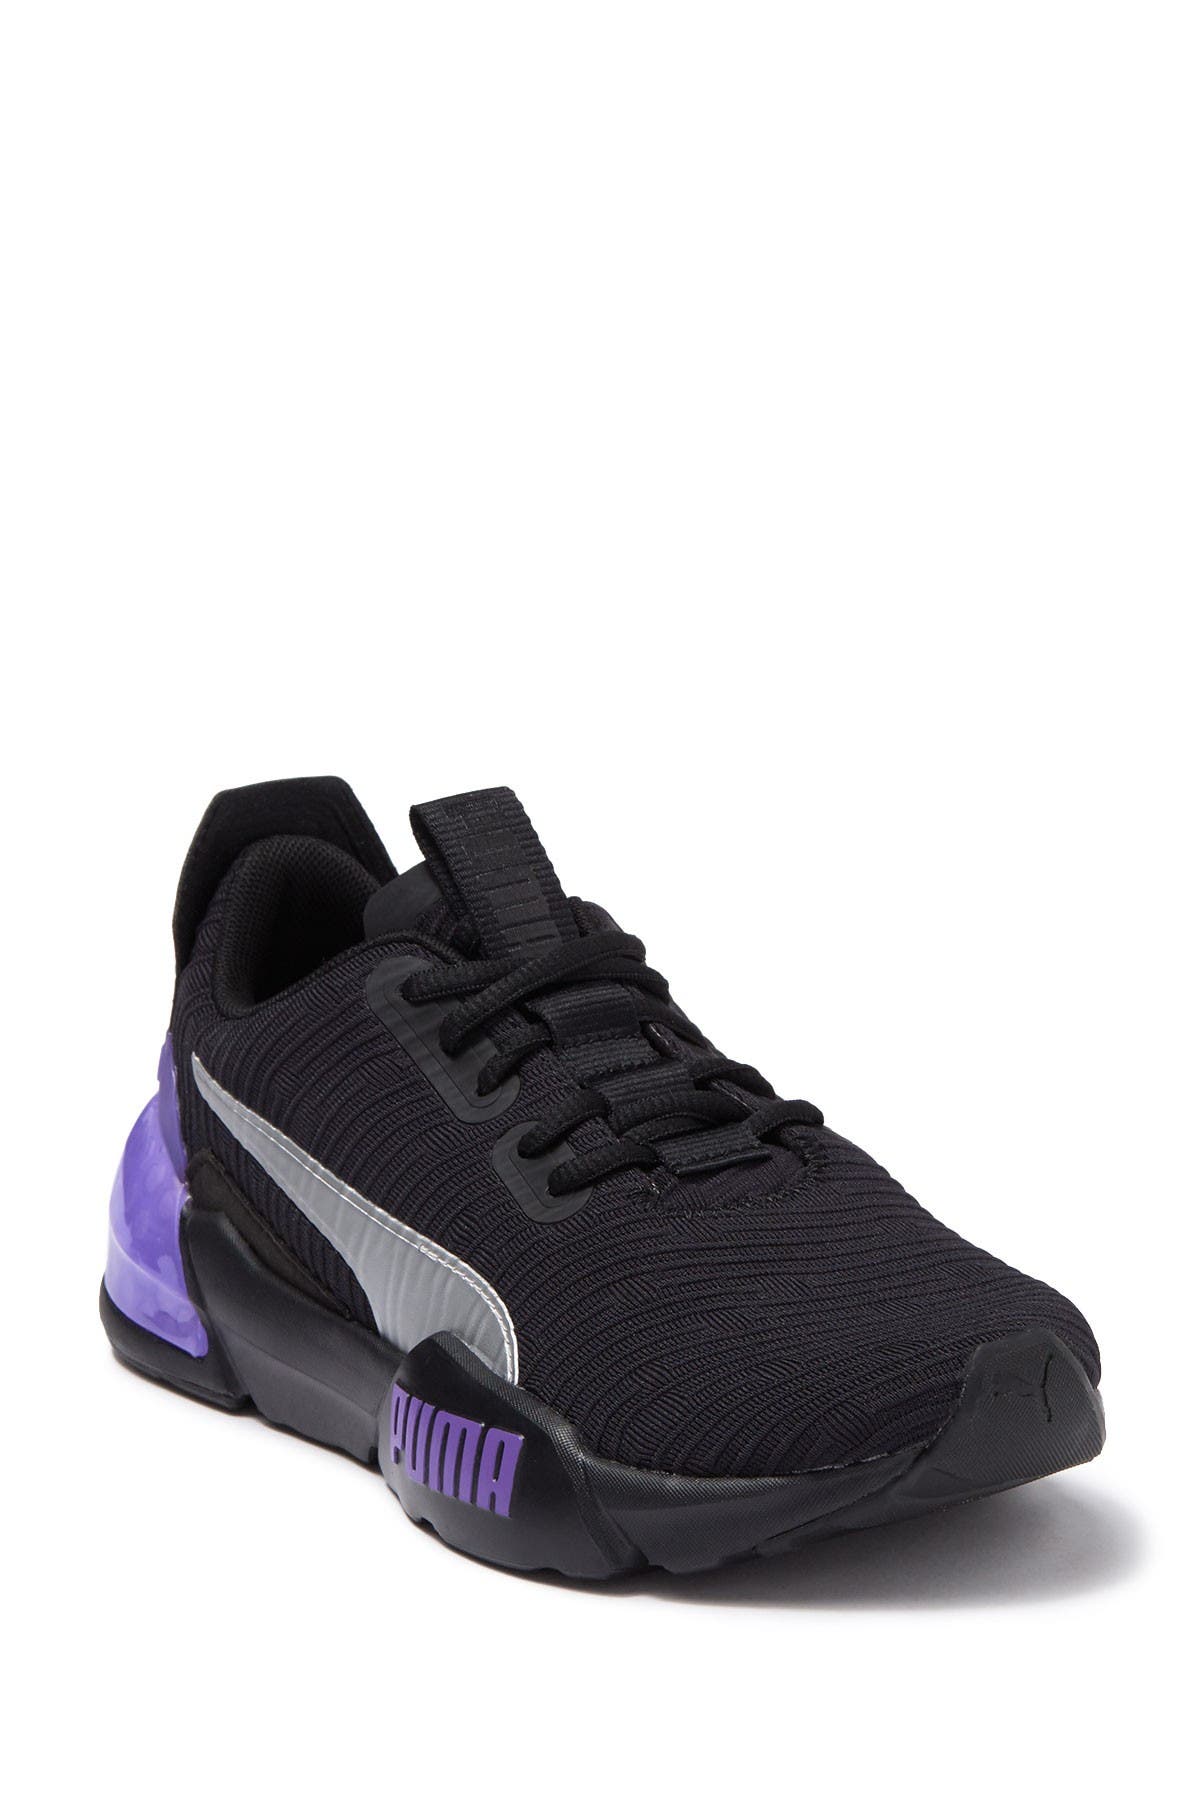 PUMA | Cell Phase Wave Sneaker 